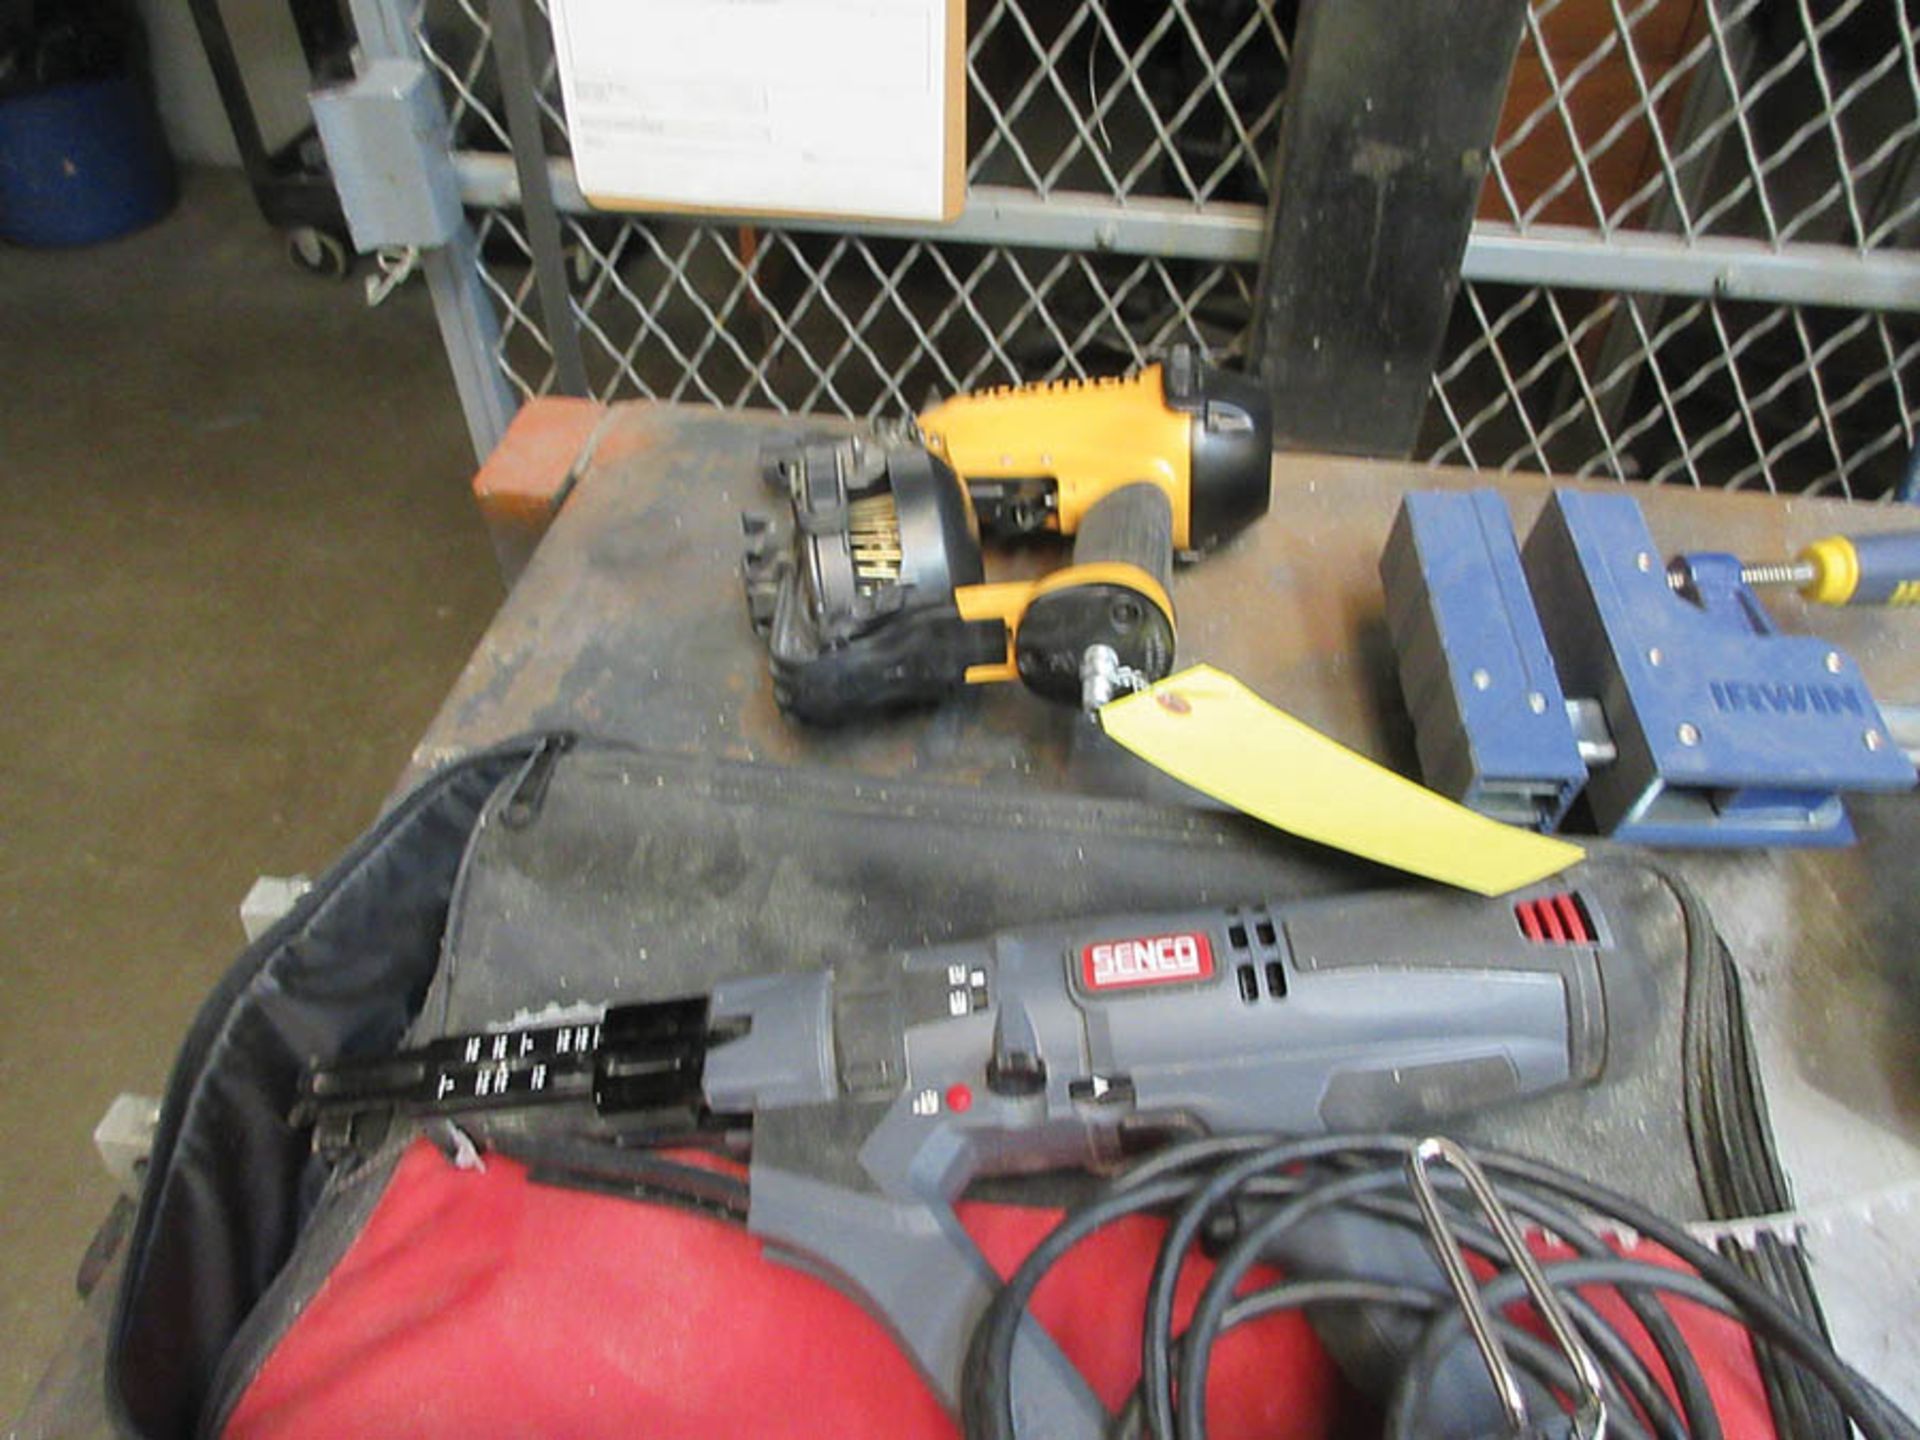 34'' X 120'' HD WORKBENCH W CONTENTS OF WILTON 4 1/2'' BENCH VISE, PALMGREN 6'' DOUBLE-END BENCH - Image 6 of 6